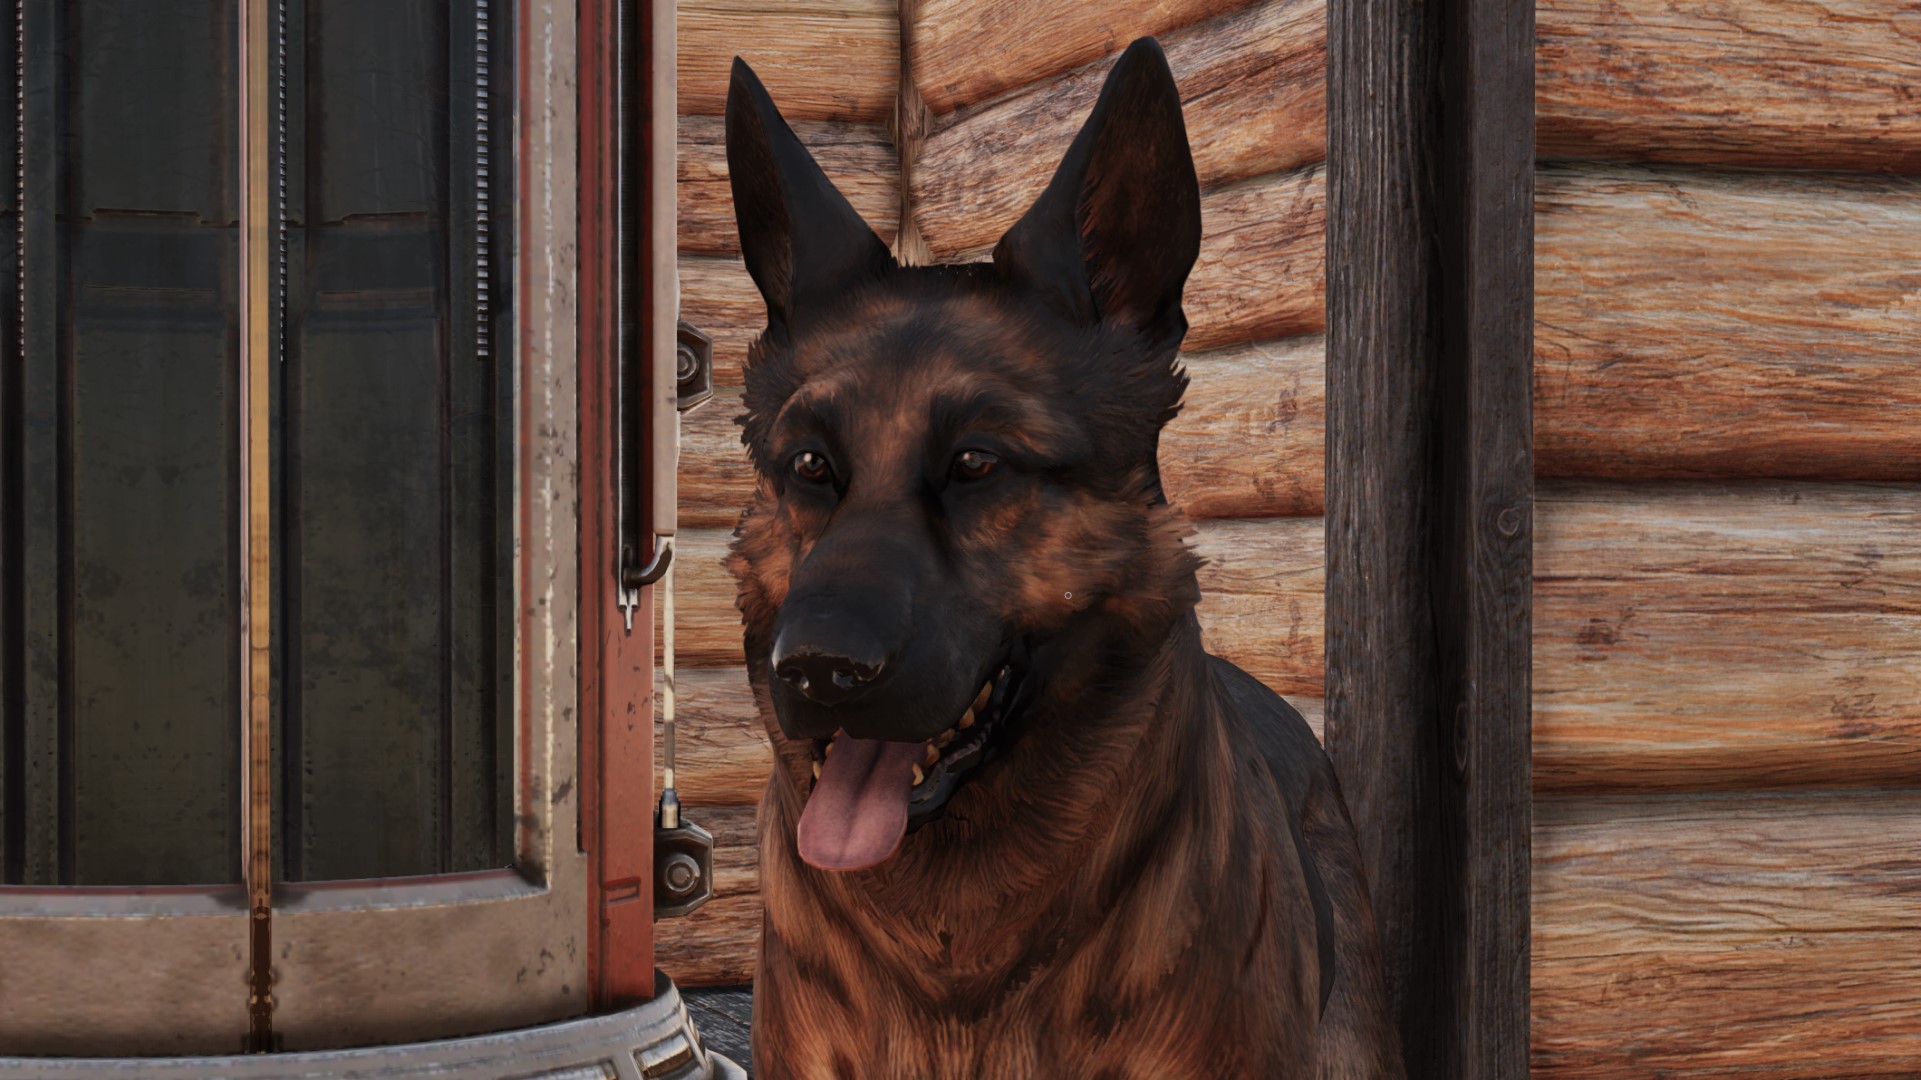 Fallout 76’s new Collectron dog has already been modded into Dogmeat